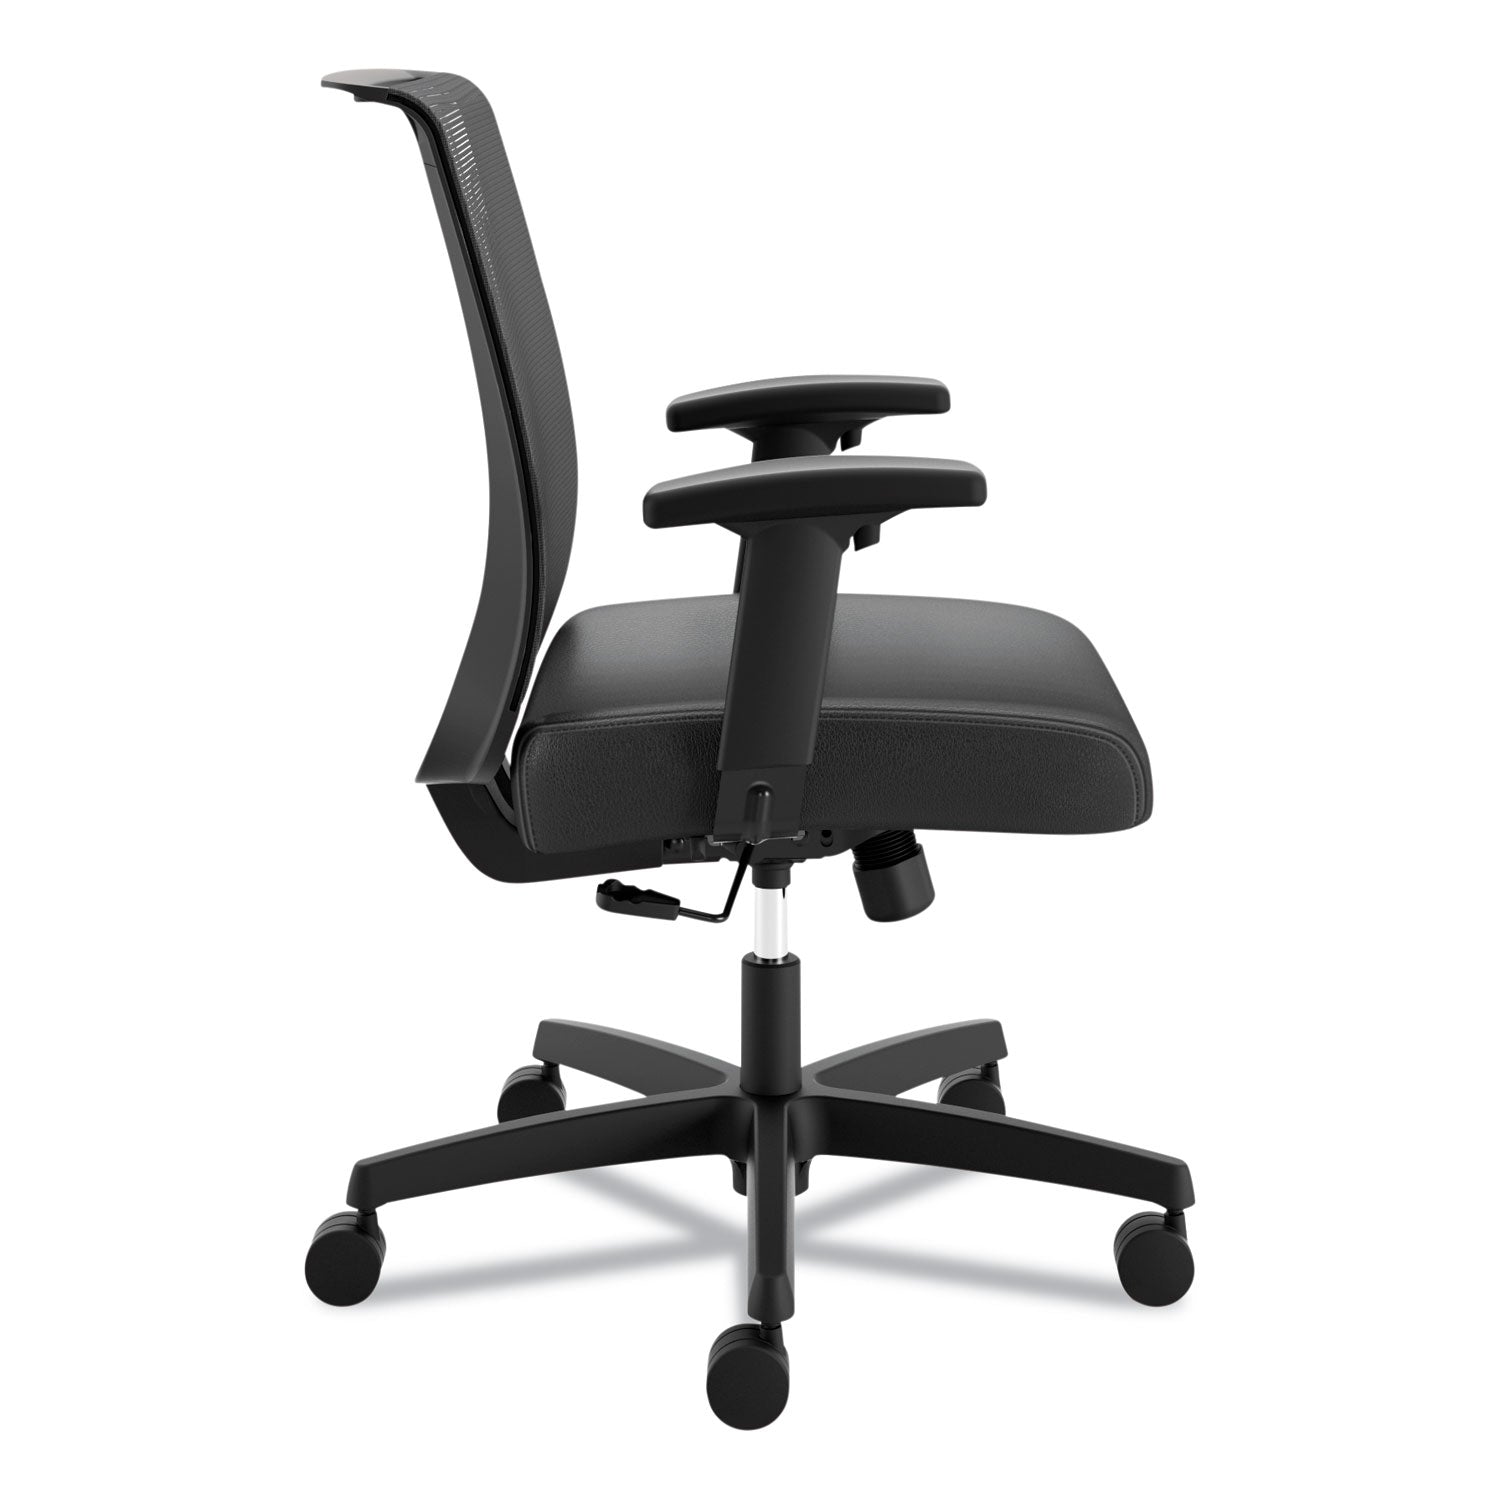 convergence-mid-back-task-chair-swivel-tilt-supports-up-to-275-lb-1575-to-2013-seat-height-black_honcms1aur10 - 3